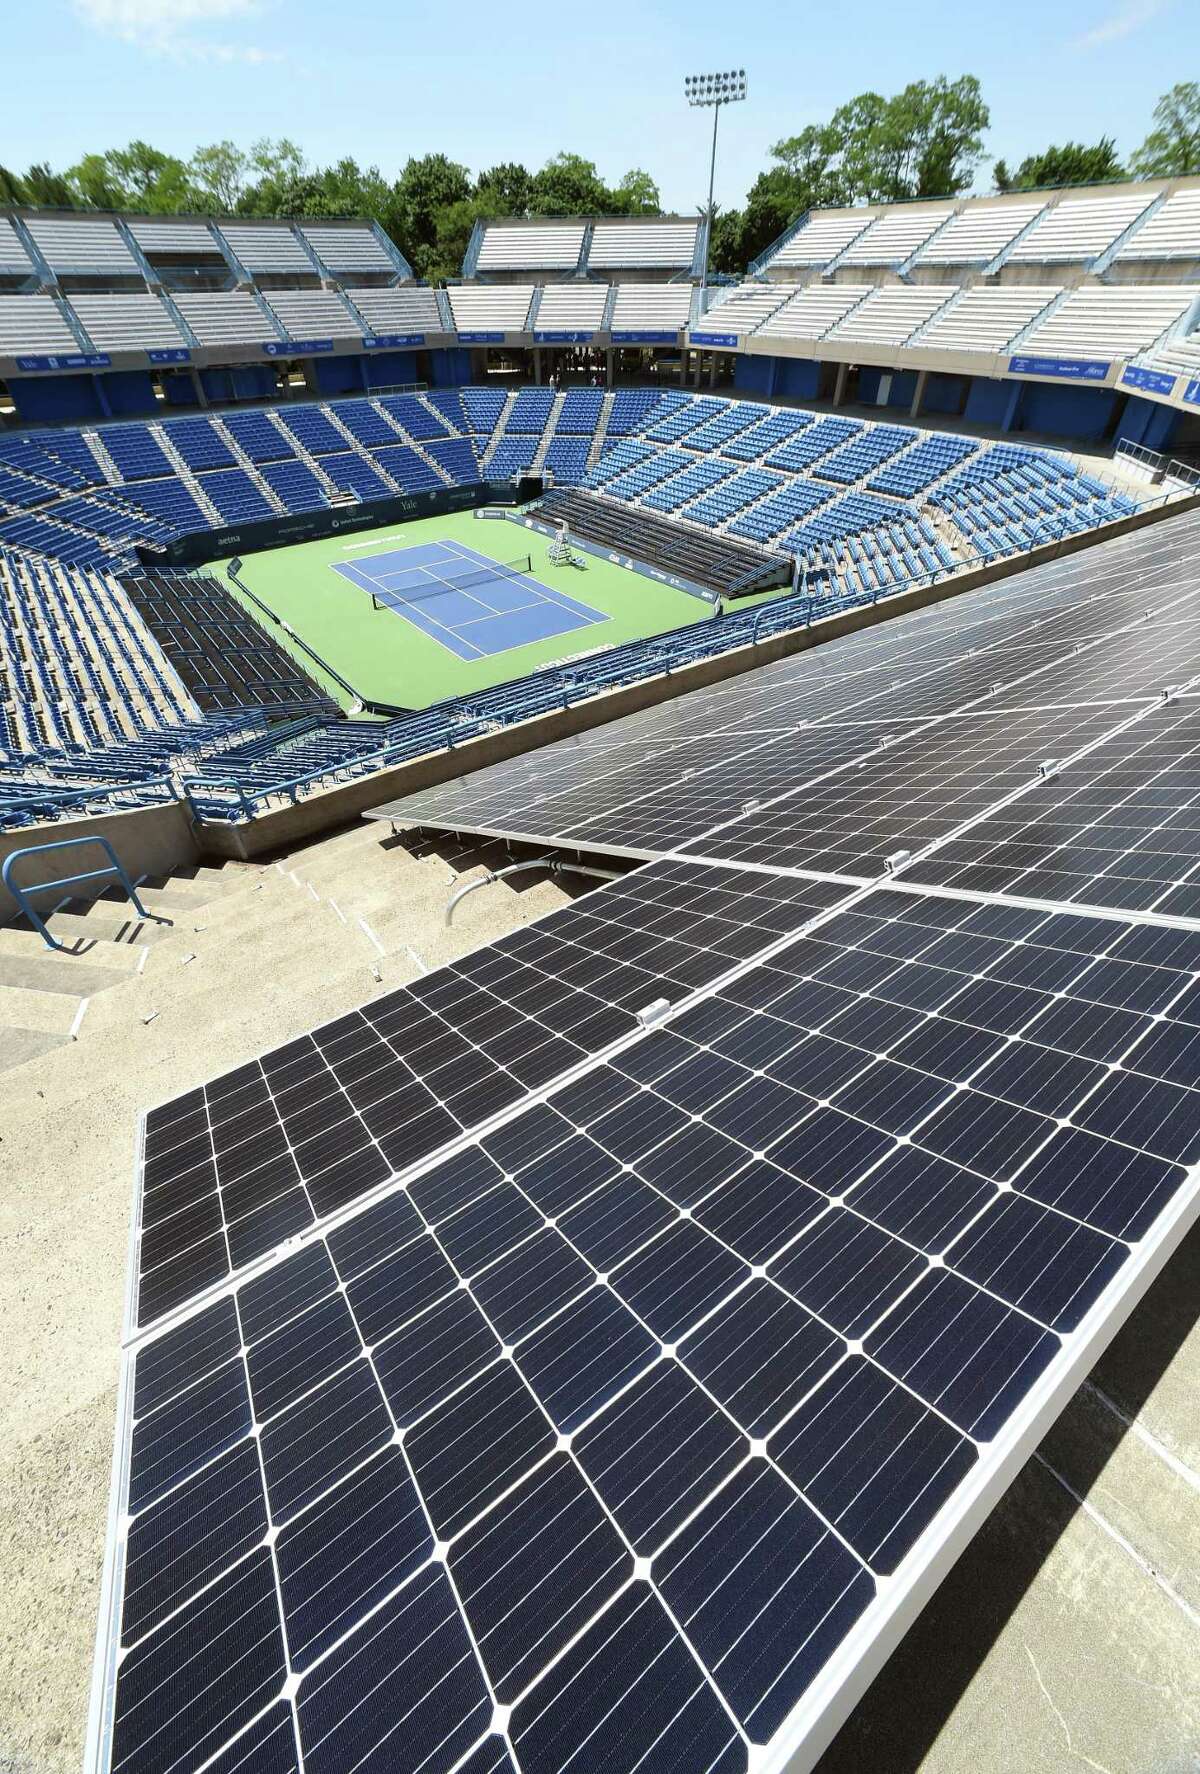 Solar panels installed on the south tier of Stadium Court at the Connecticut Tennis Center in New Haven have been funded by Star Power Energy of Branford and will be gifted to the Connecticut Tennis Center after 20 years.